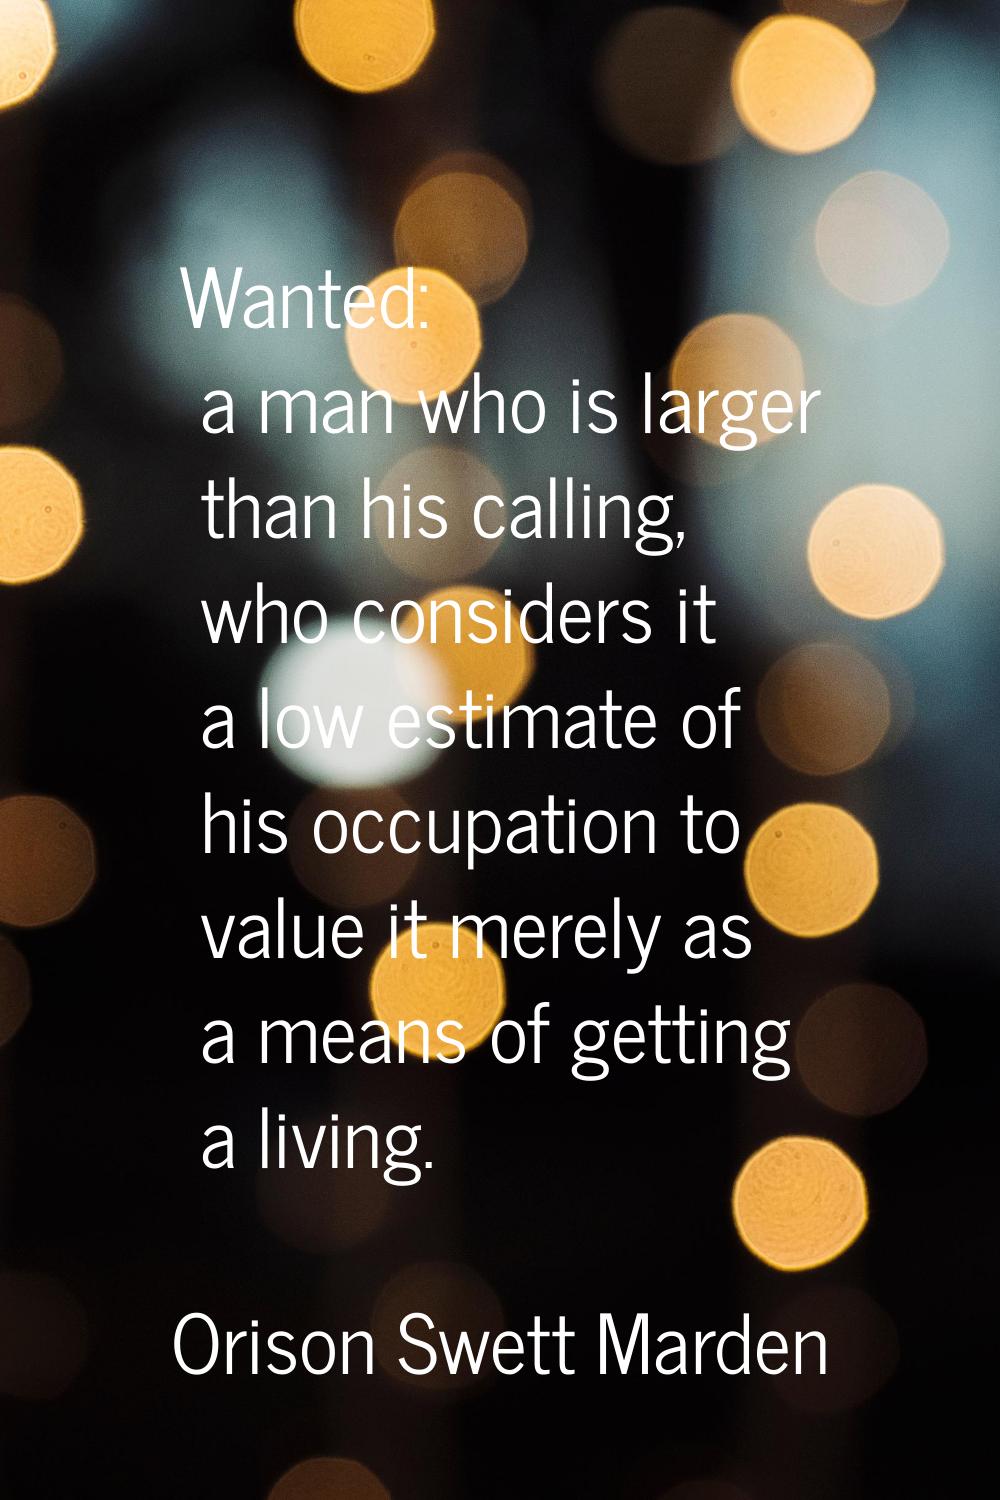 Wanted: a man who is larger than his calling, who considers it a low estimate of his occupation to 